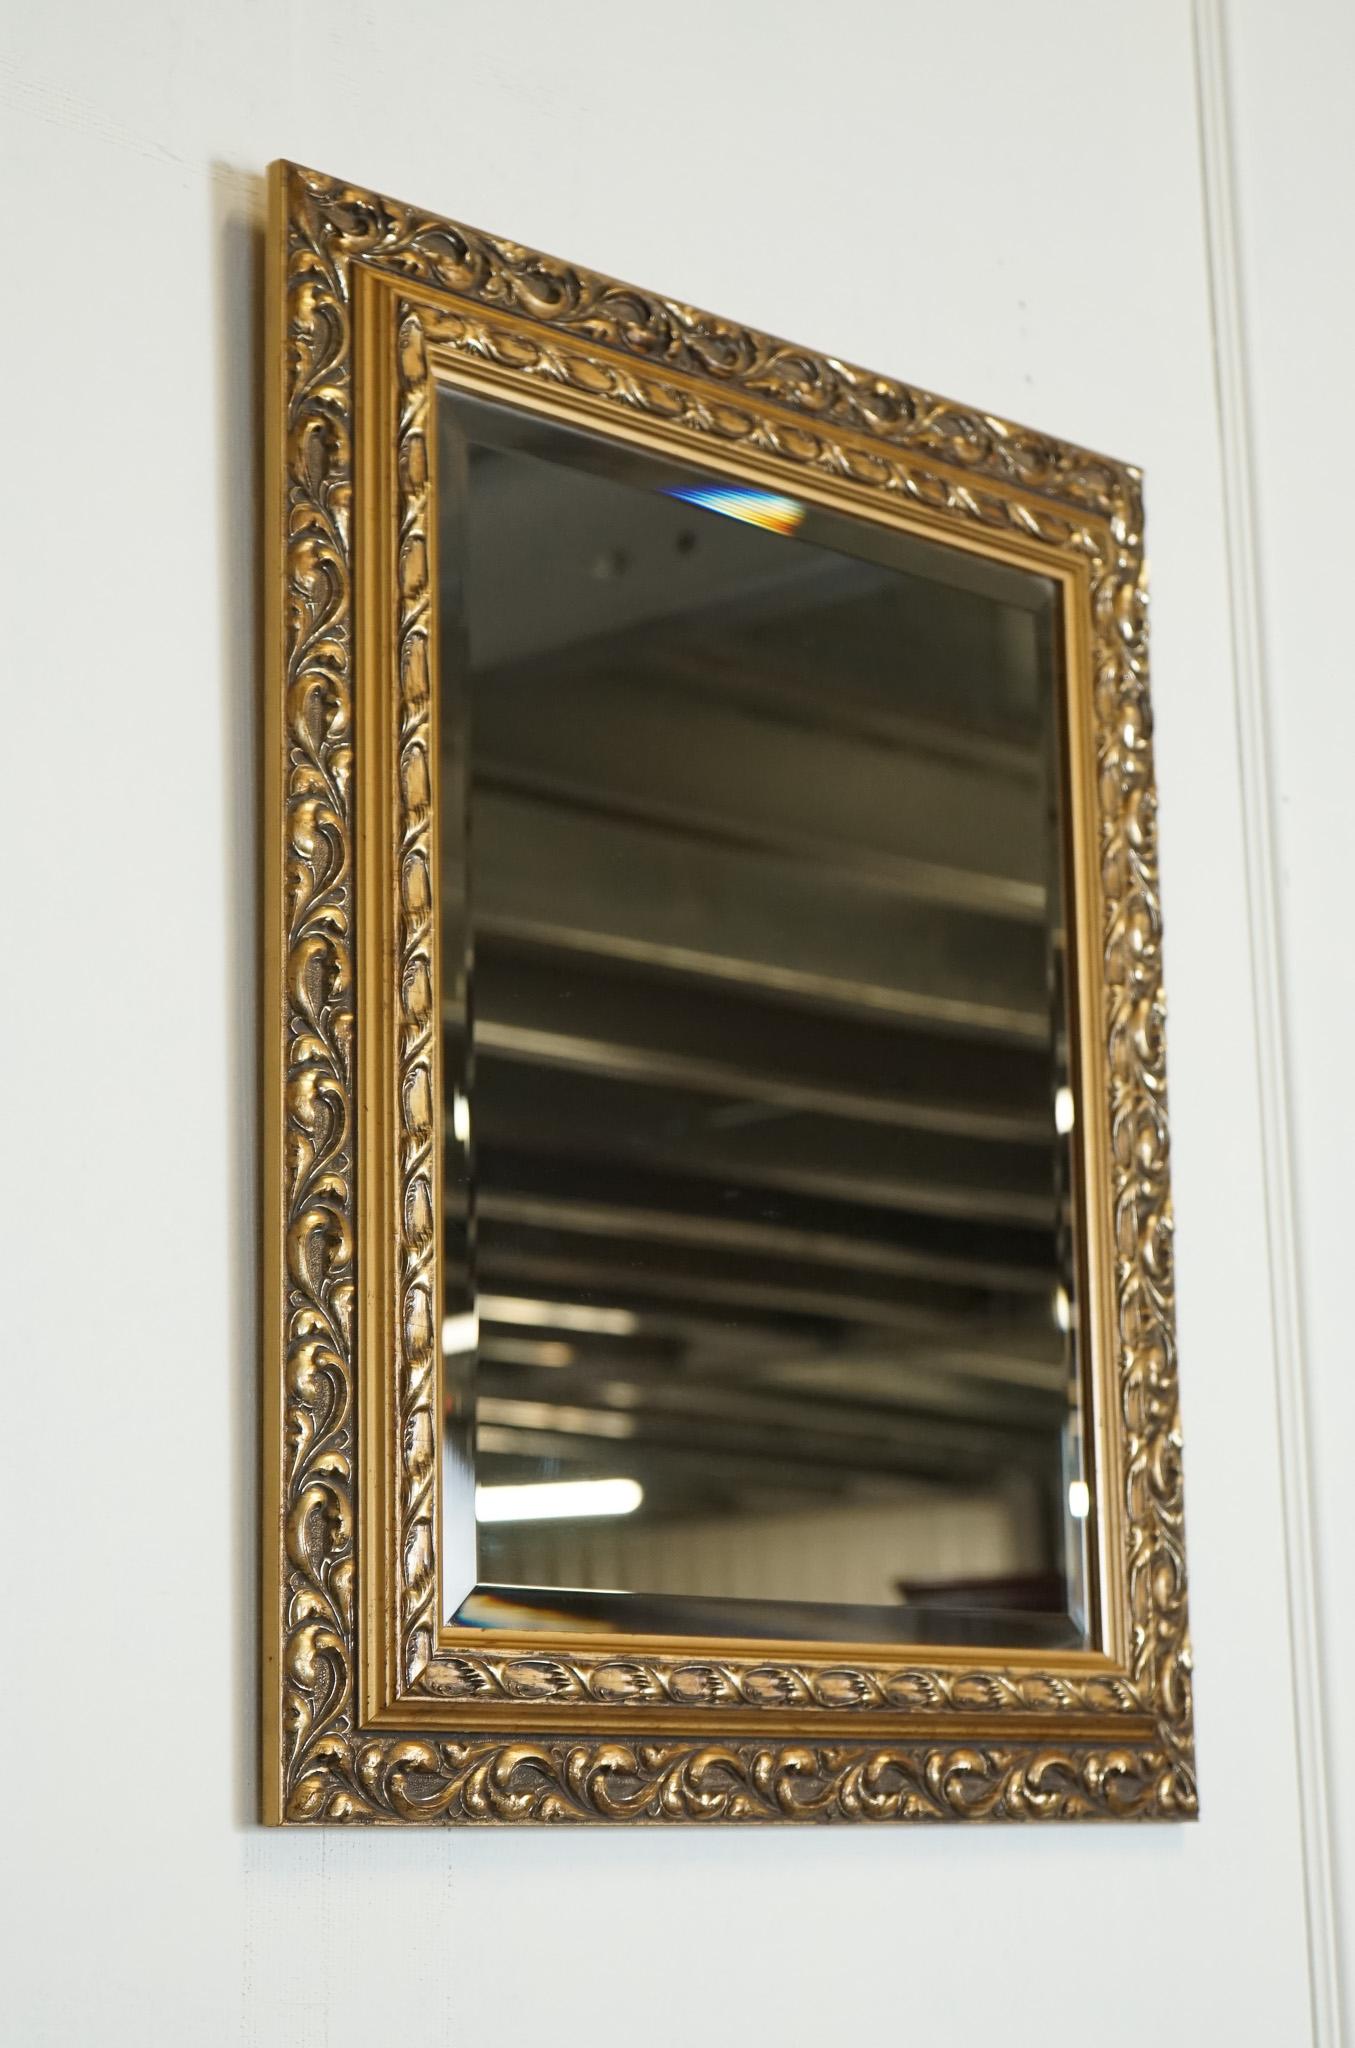 Antiques of London



We are delighted to offer for sale this Lovely Vintage Gold Ornate Mirror.

A vintage petite gold ornate bevelled mirror is a stunning piece that exudes opulence and elegance. This type of mirror is typically smaller in size,